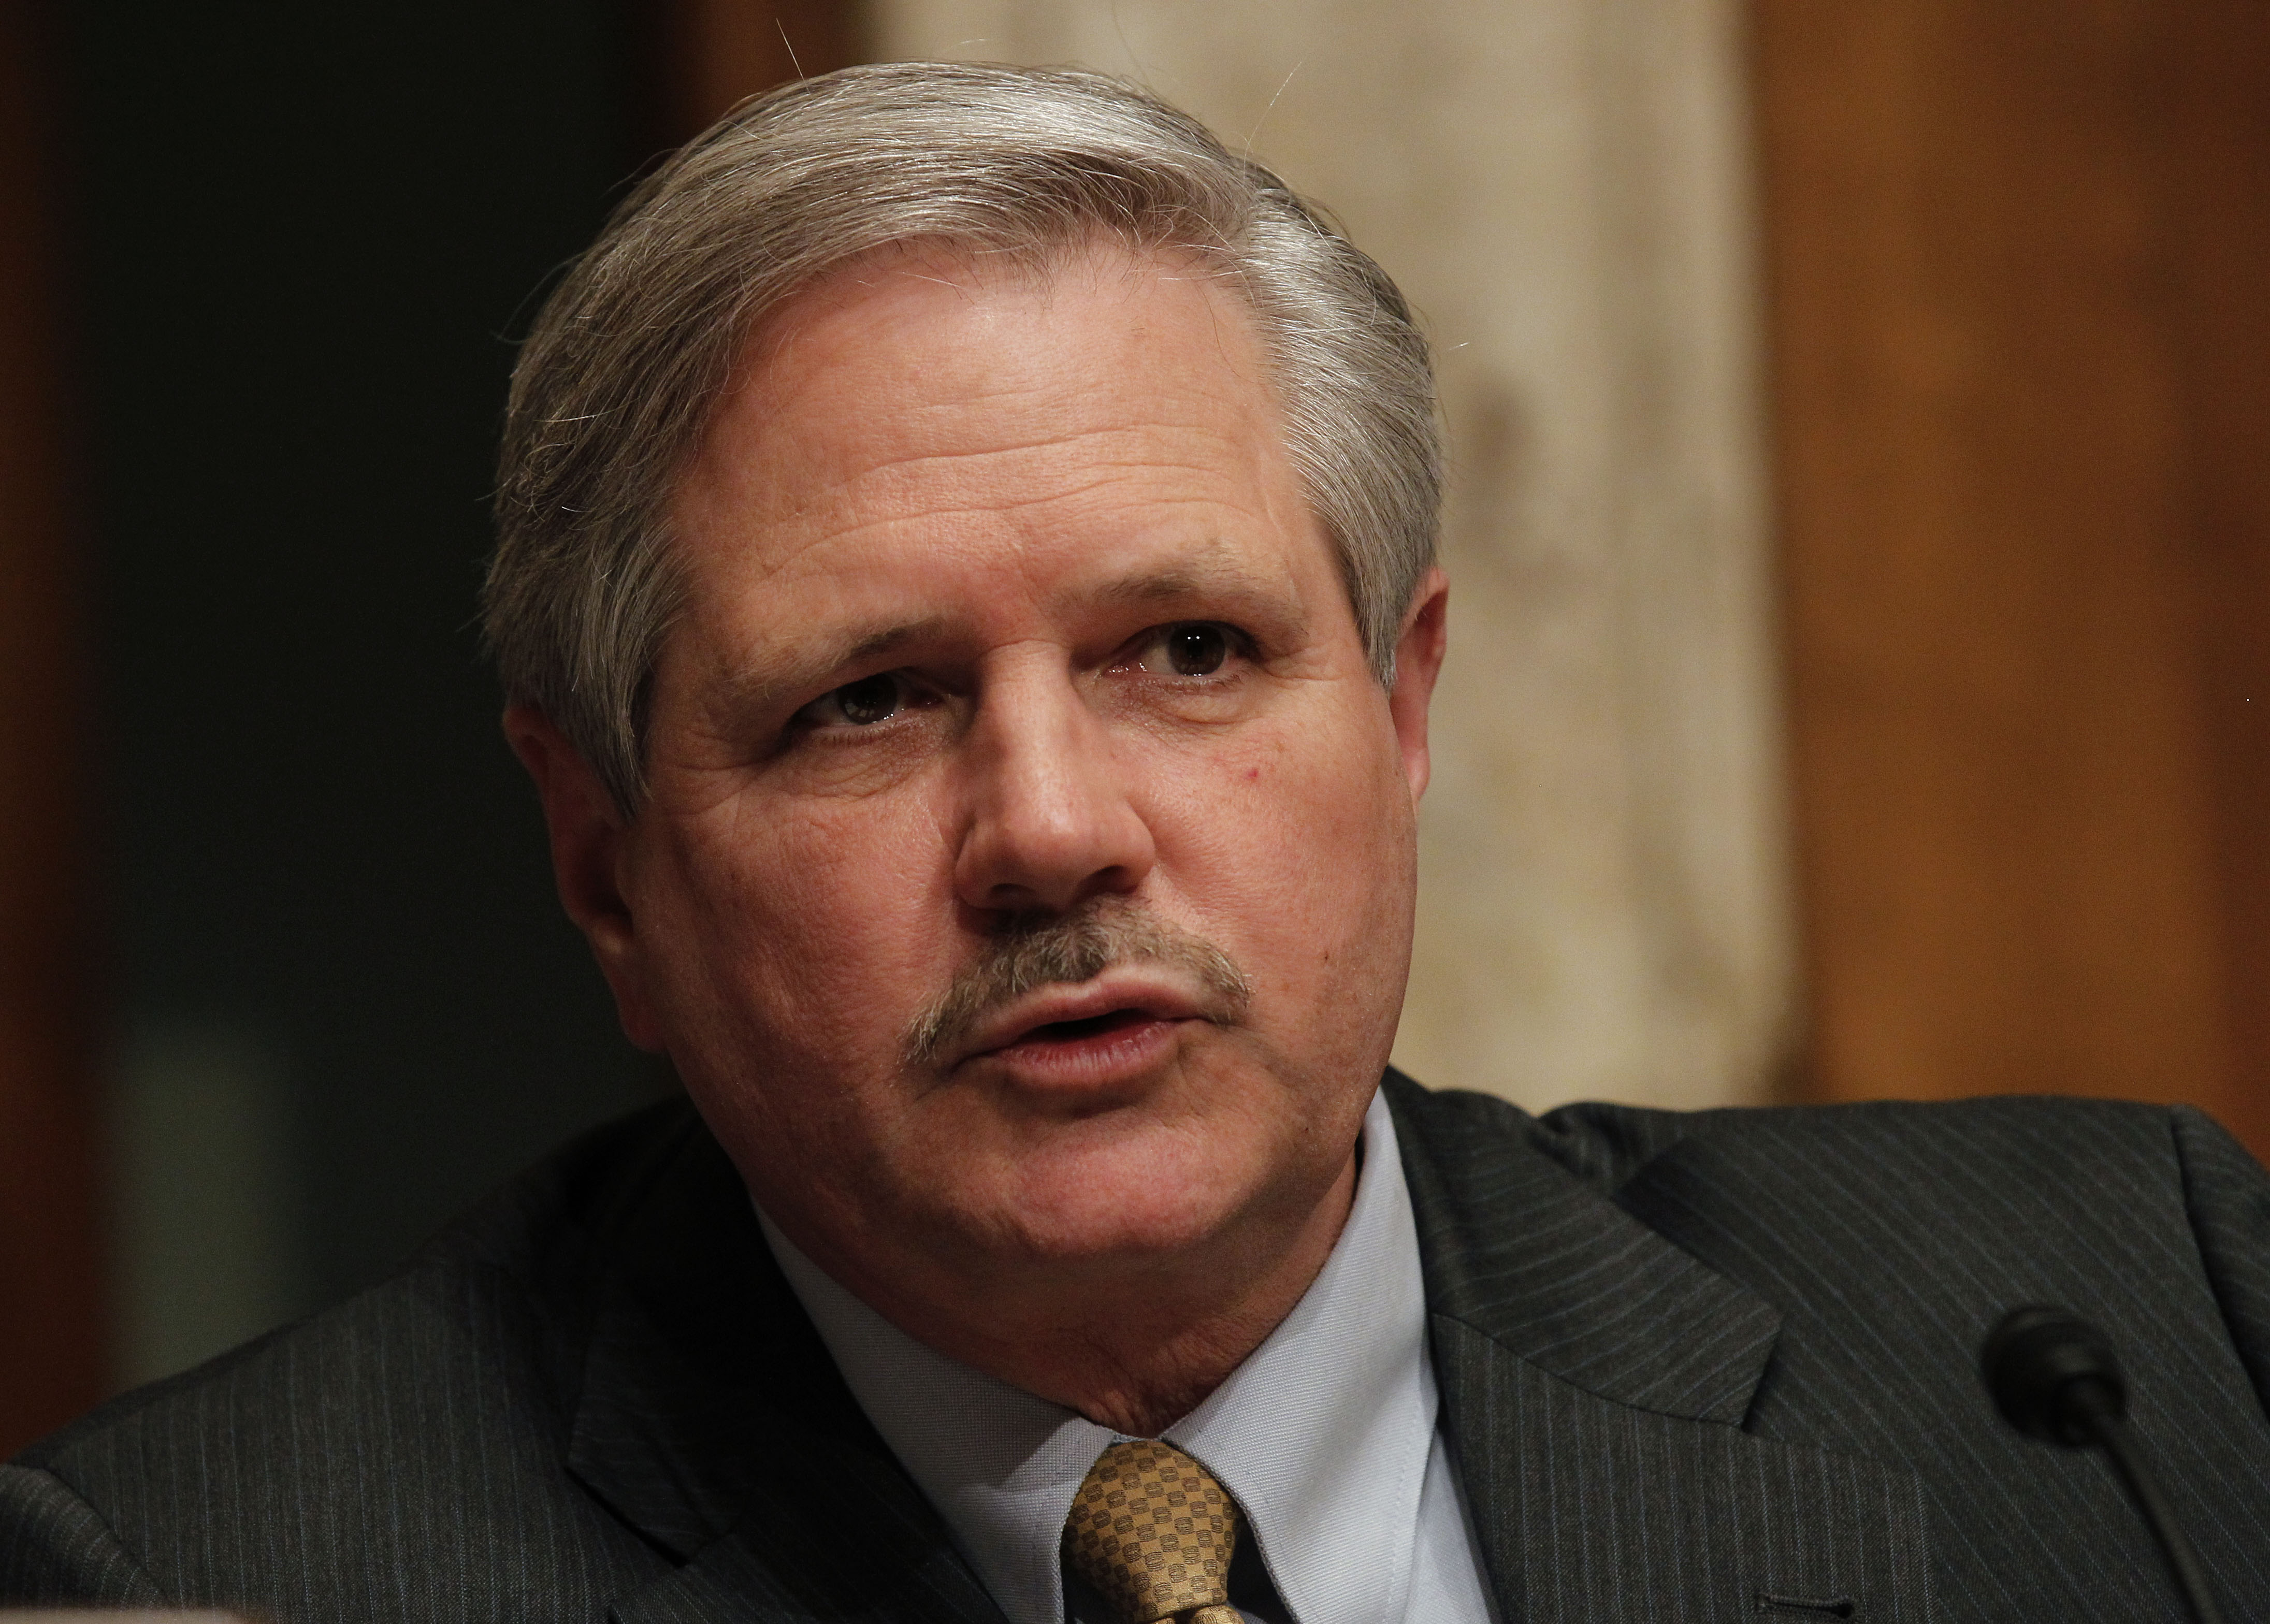 Hoeven faces primary challenge from political newcomer